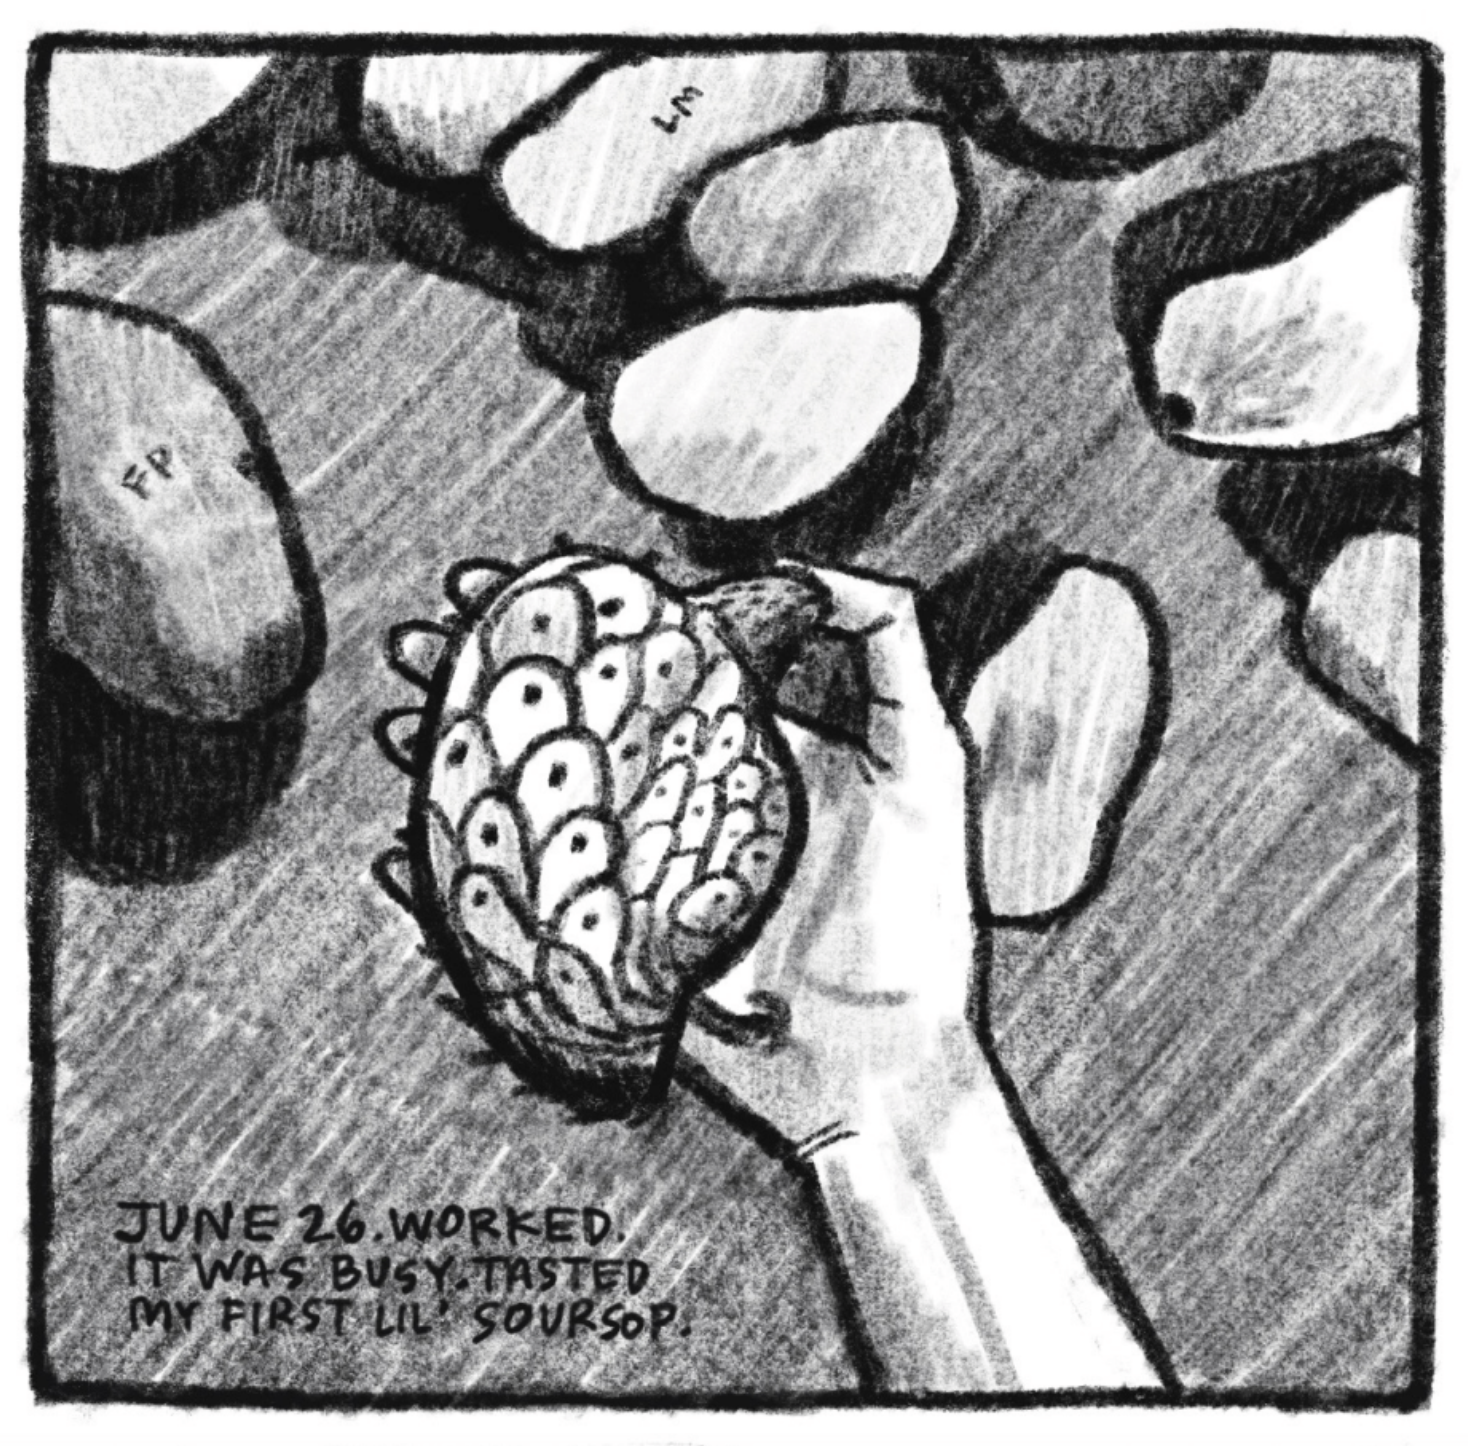 1. A close-up view of Kim holding a soursop in her hand. It is a fruit the size of a mango that looks similar to a pineapple, as if itâ€™s covered in armor. Other fruits sit on the table. â€œJune 26. Worked. It was busy. Tasted my first lilâ€™ soursop.â€